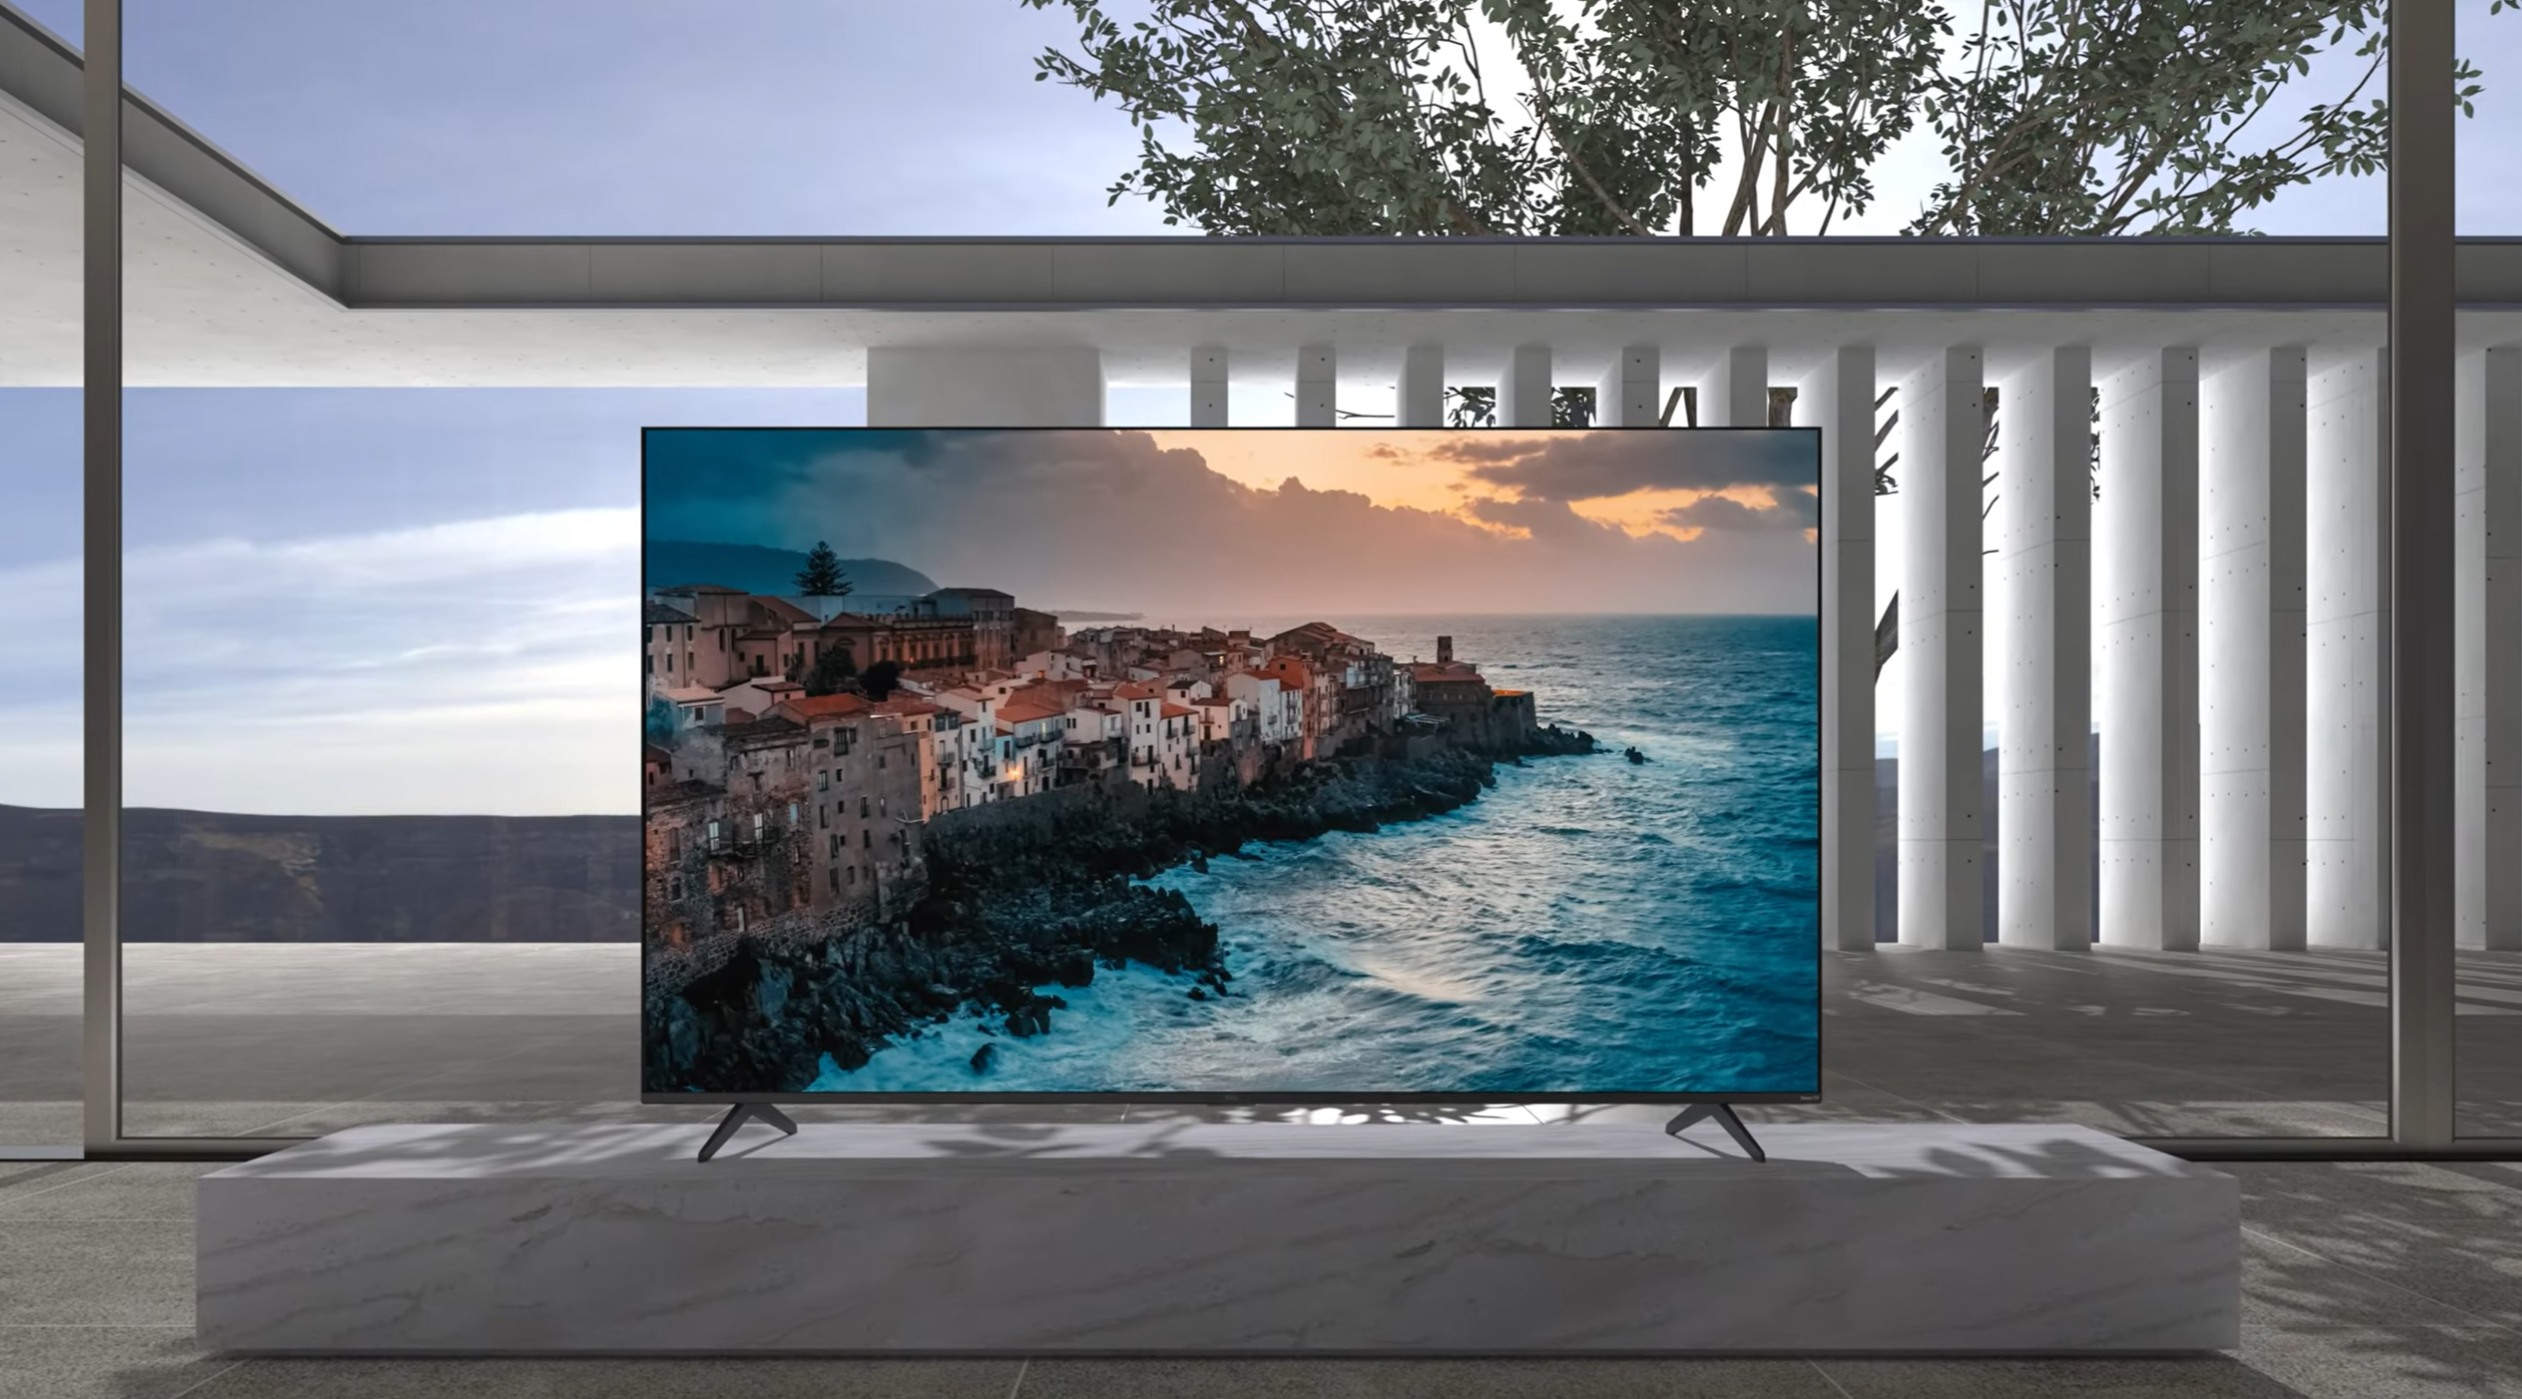 TCL 5 Series featured